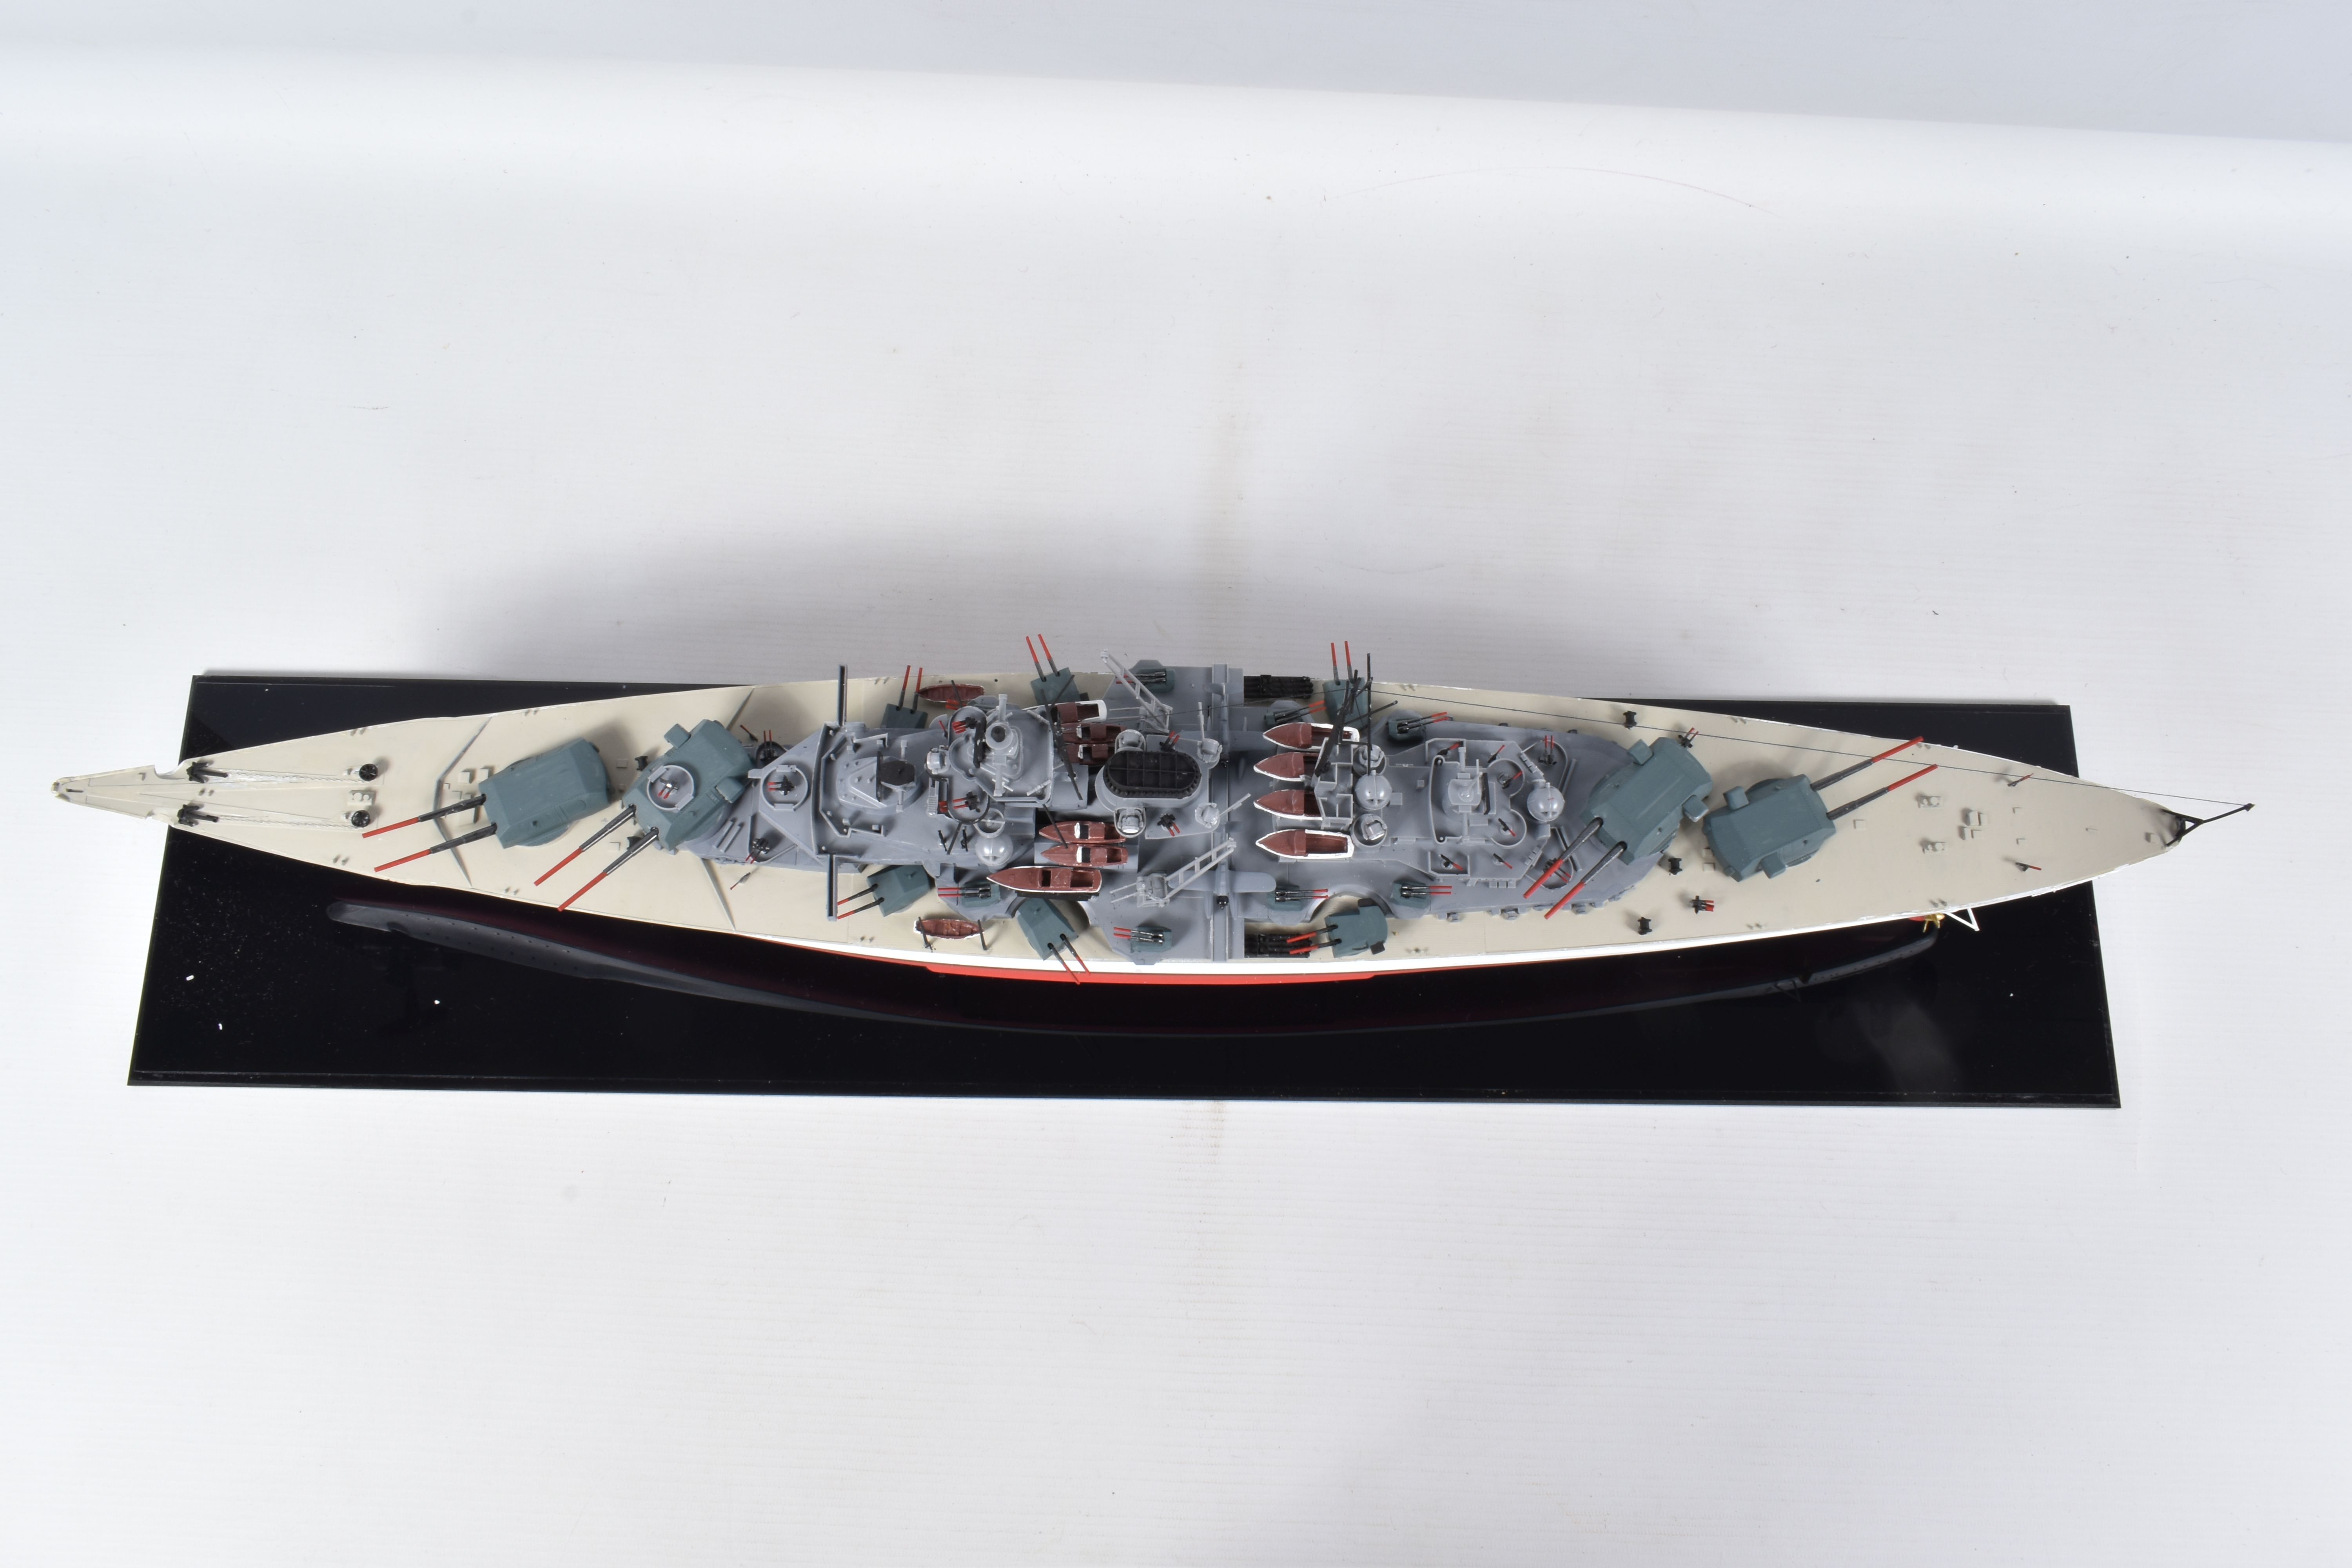 TWO CONSTRUCTED REVELL PLASTIC KITS OF GERMAN WARSHIPS BOTH HOUSED IN PERSPEX DISPLAY CASES, ' - Image 12 of 12